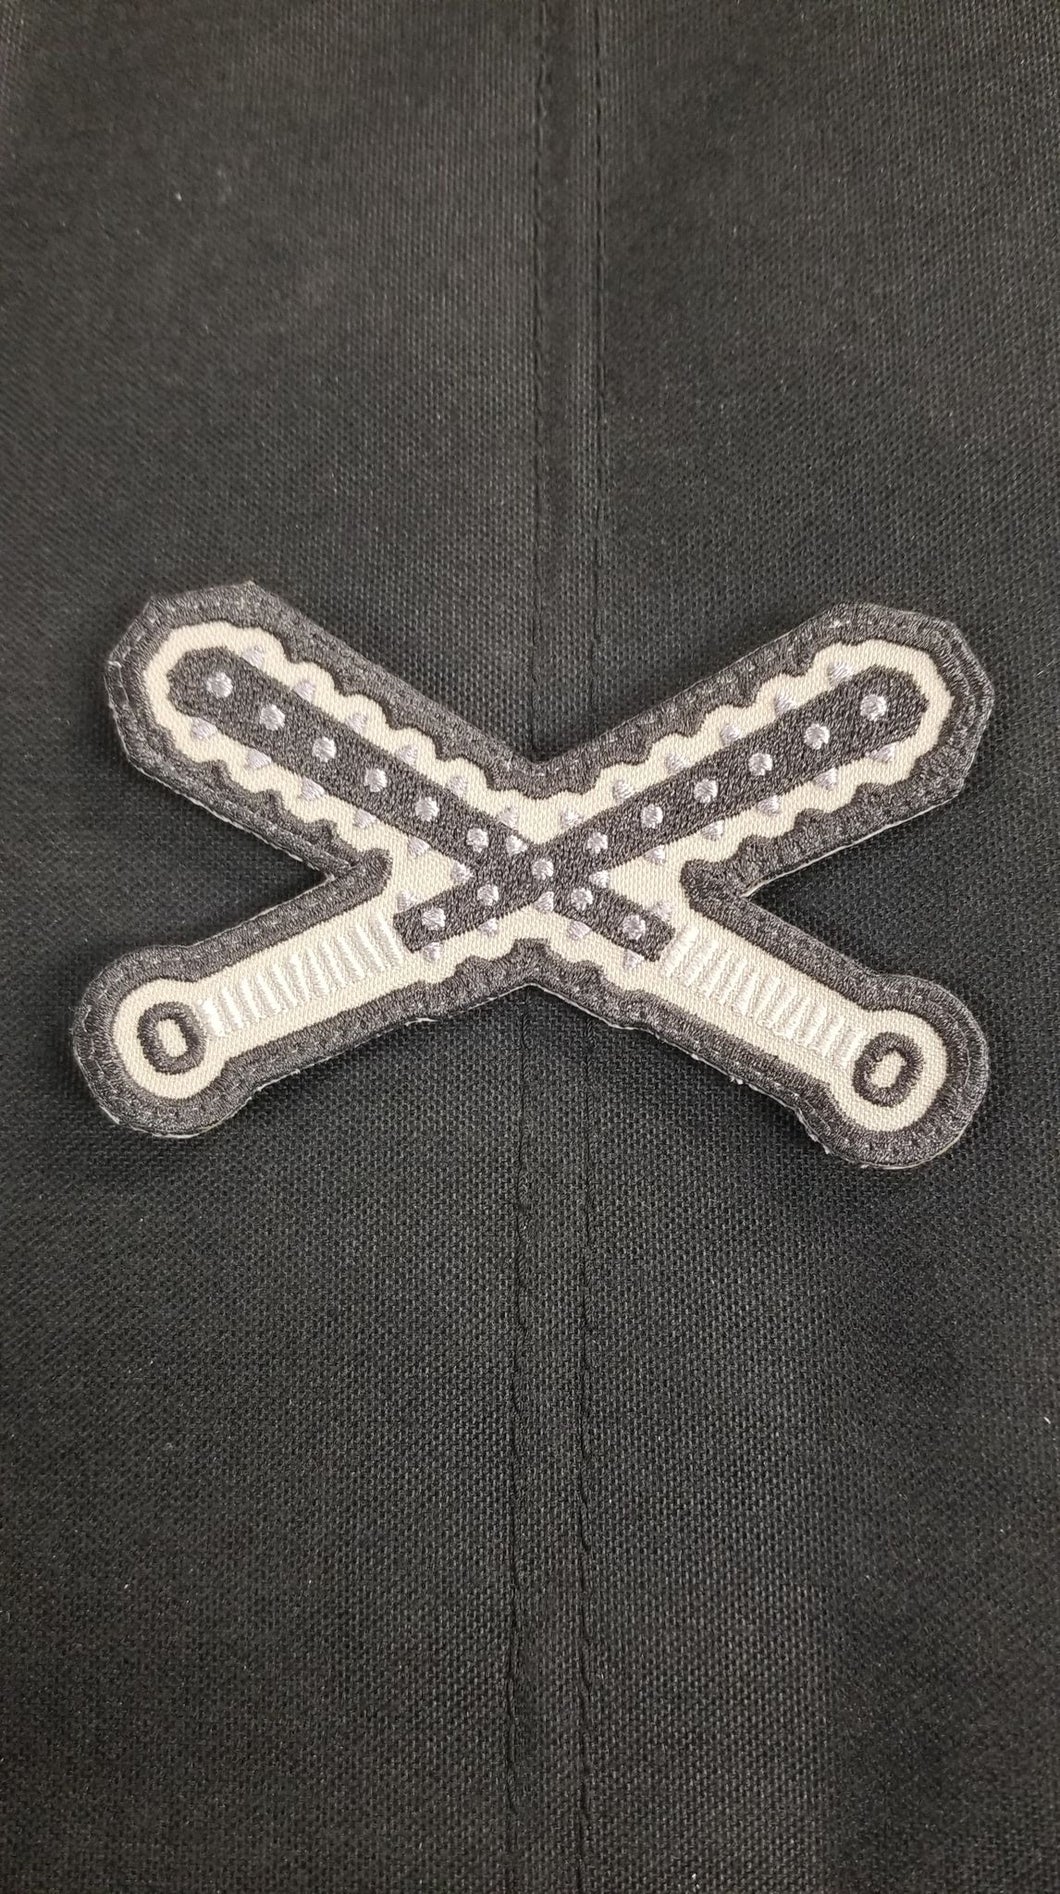 Crossed Kanabo Patch